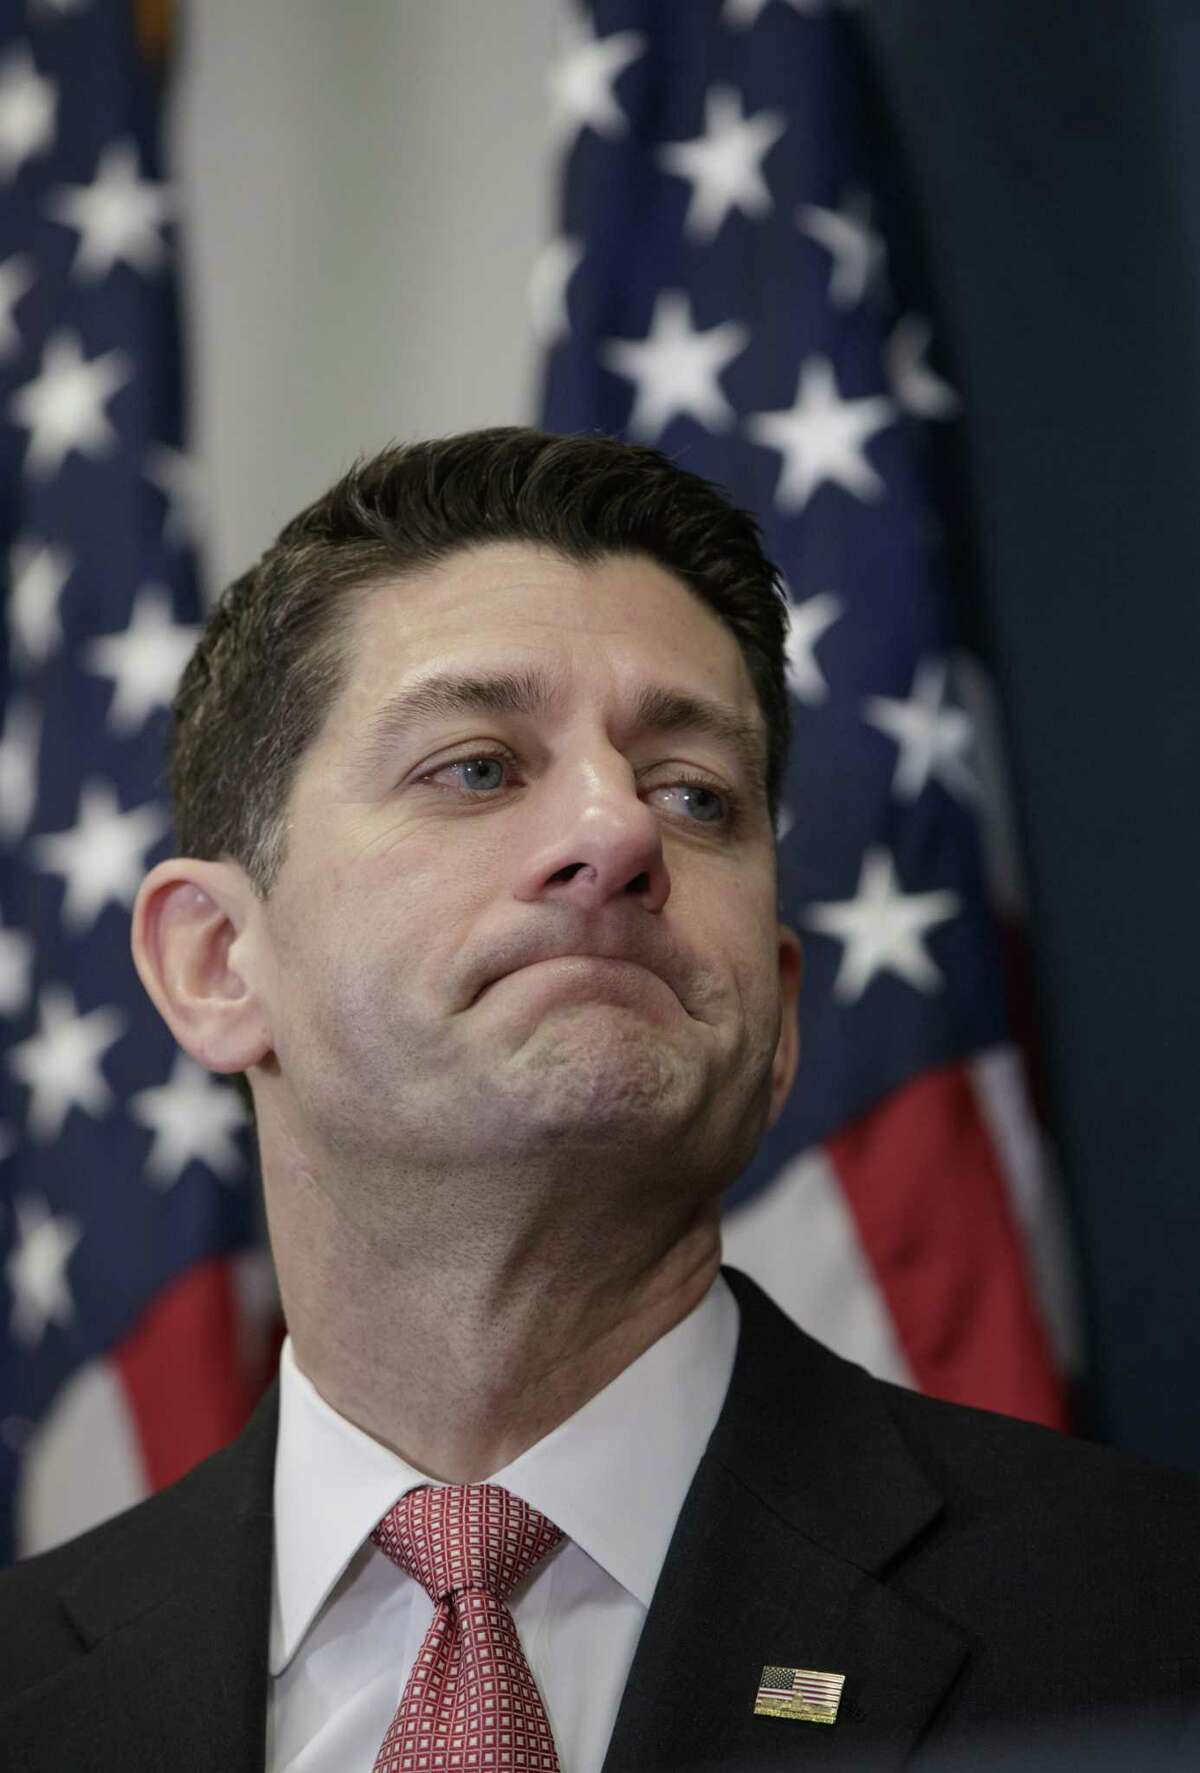 House Speaker Paul Ryan of Wis., pauses as he speaks on Capitol Hill in Washington, Tuesday, March 28, 2017, about getting past last week's failure to pass a health care overhaul bill and rebuilding unity in the Republican Conference. (AP Photo/J. Scott Applewhite)